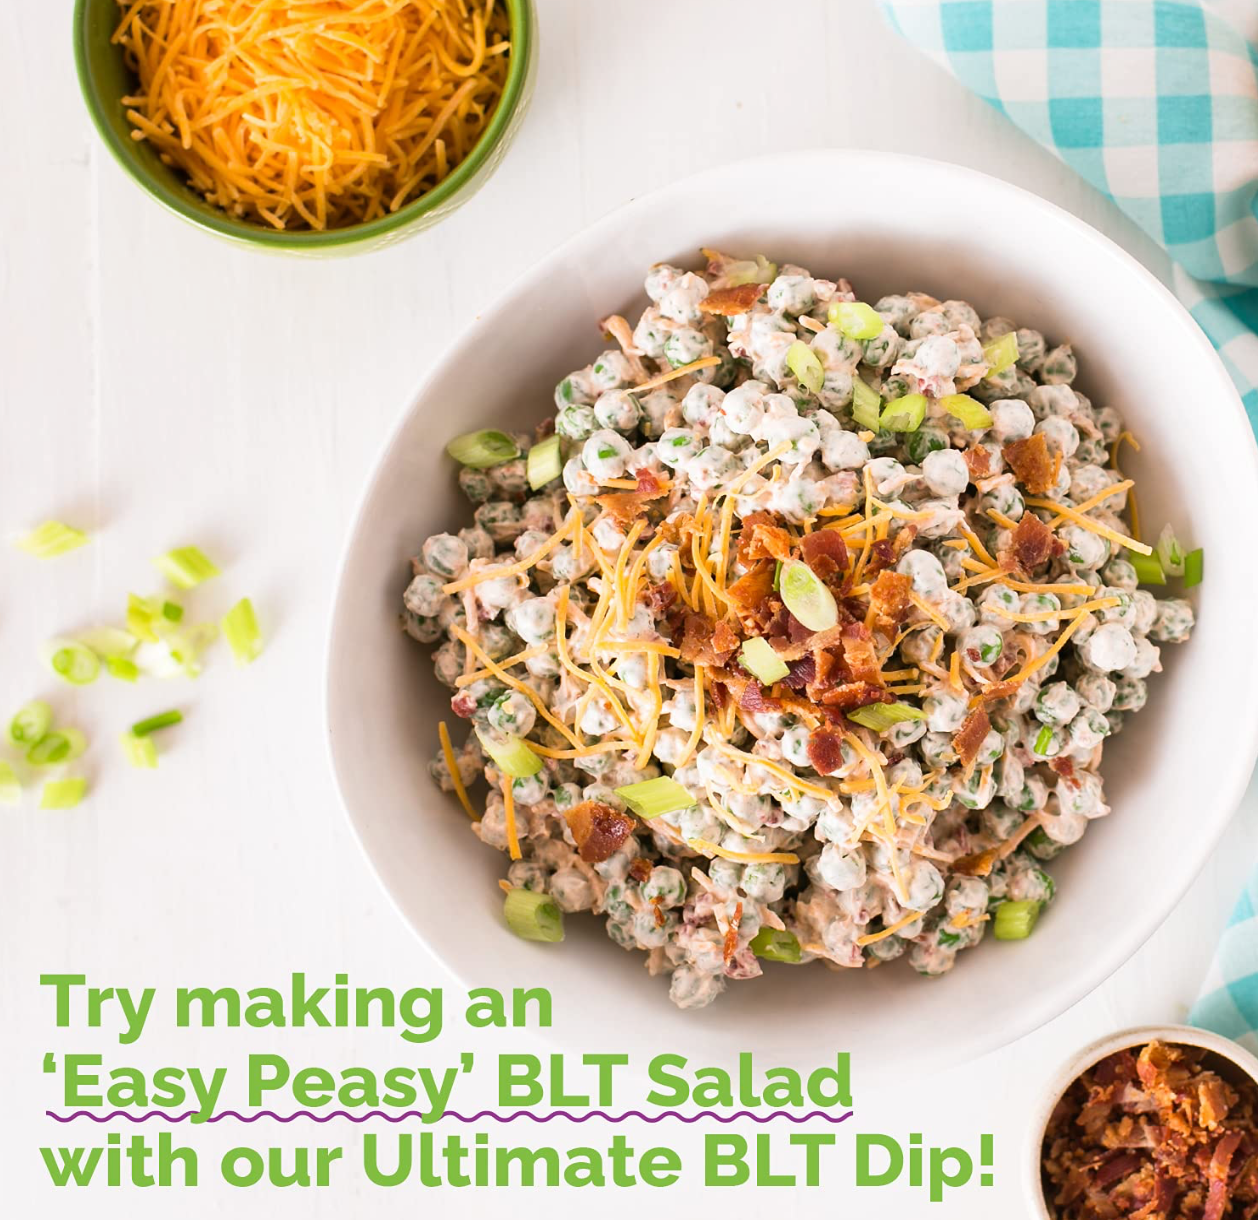 Ultimate BLT Party Dip Mix 3-Pack